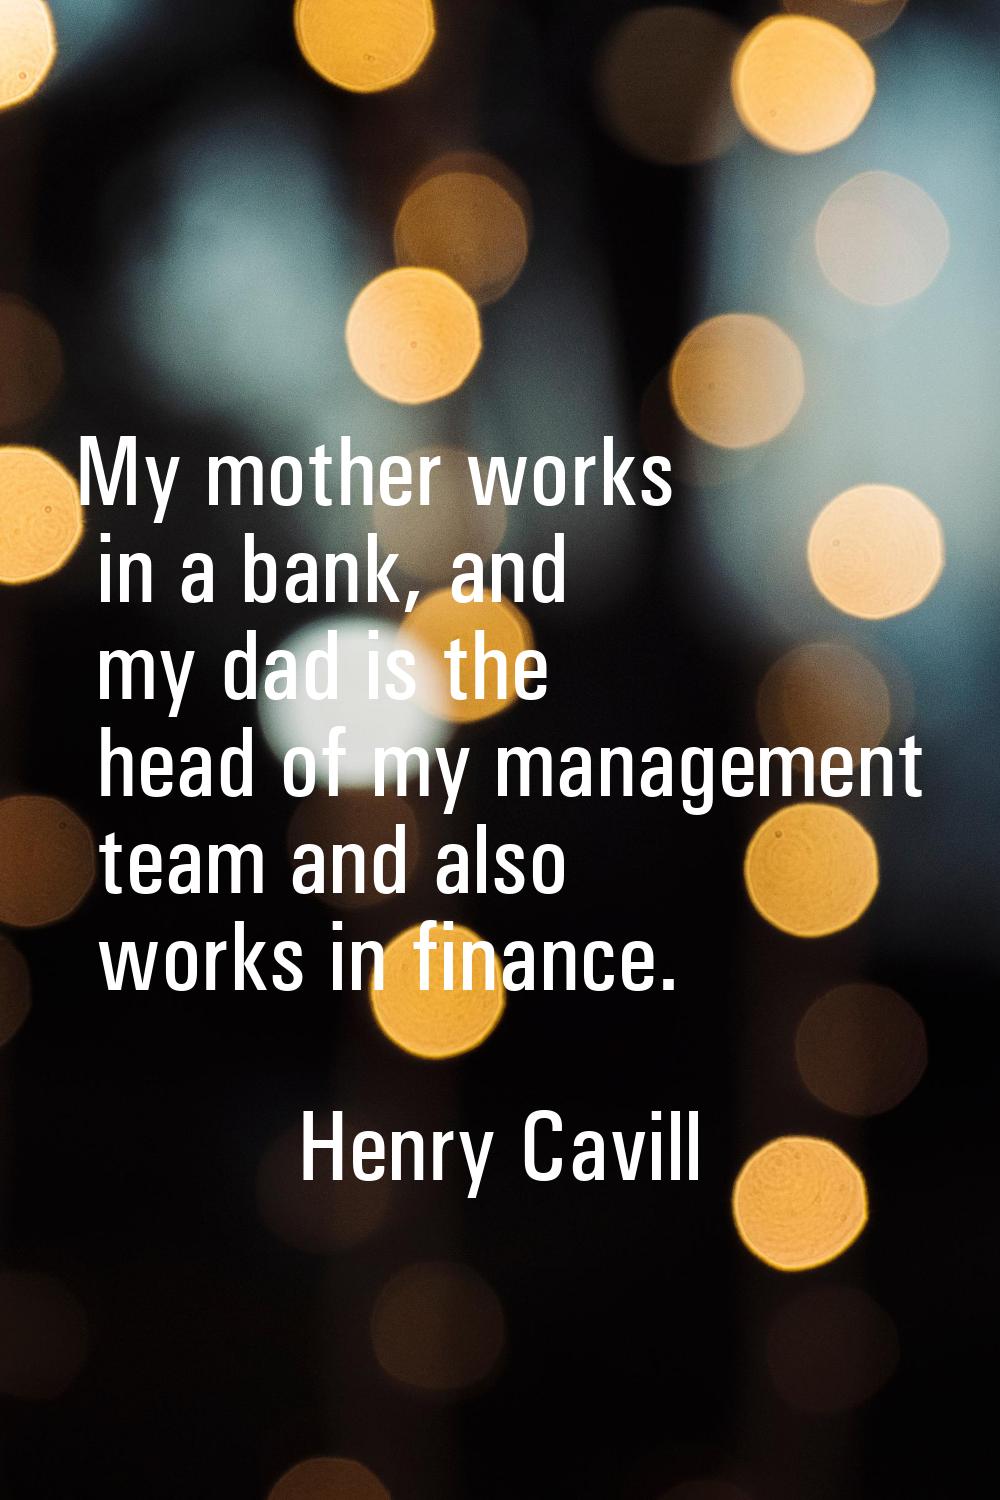 My mother works in a bank, and my dad is the head of my management team and also works in finance.